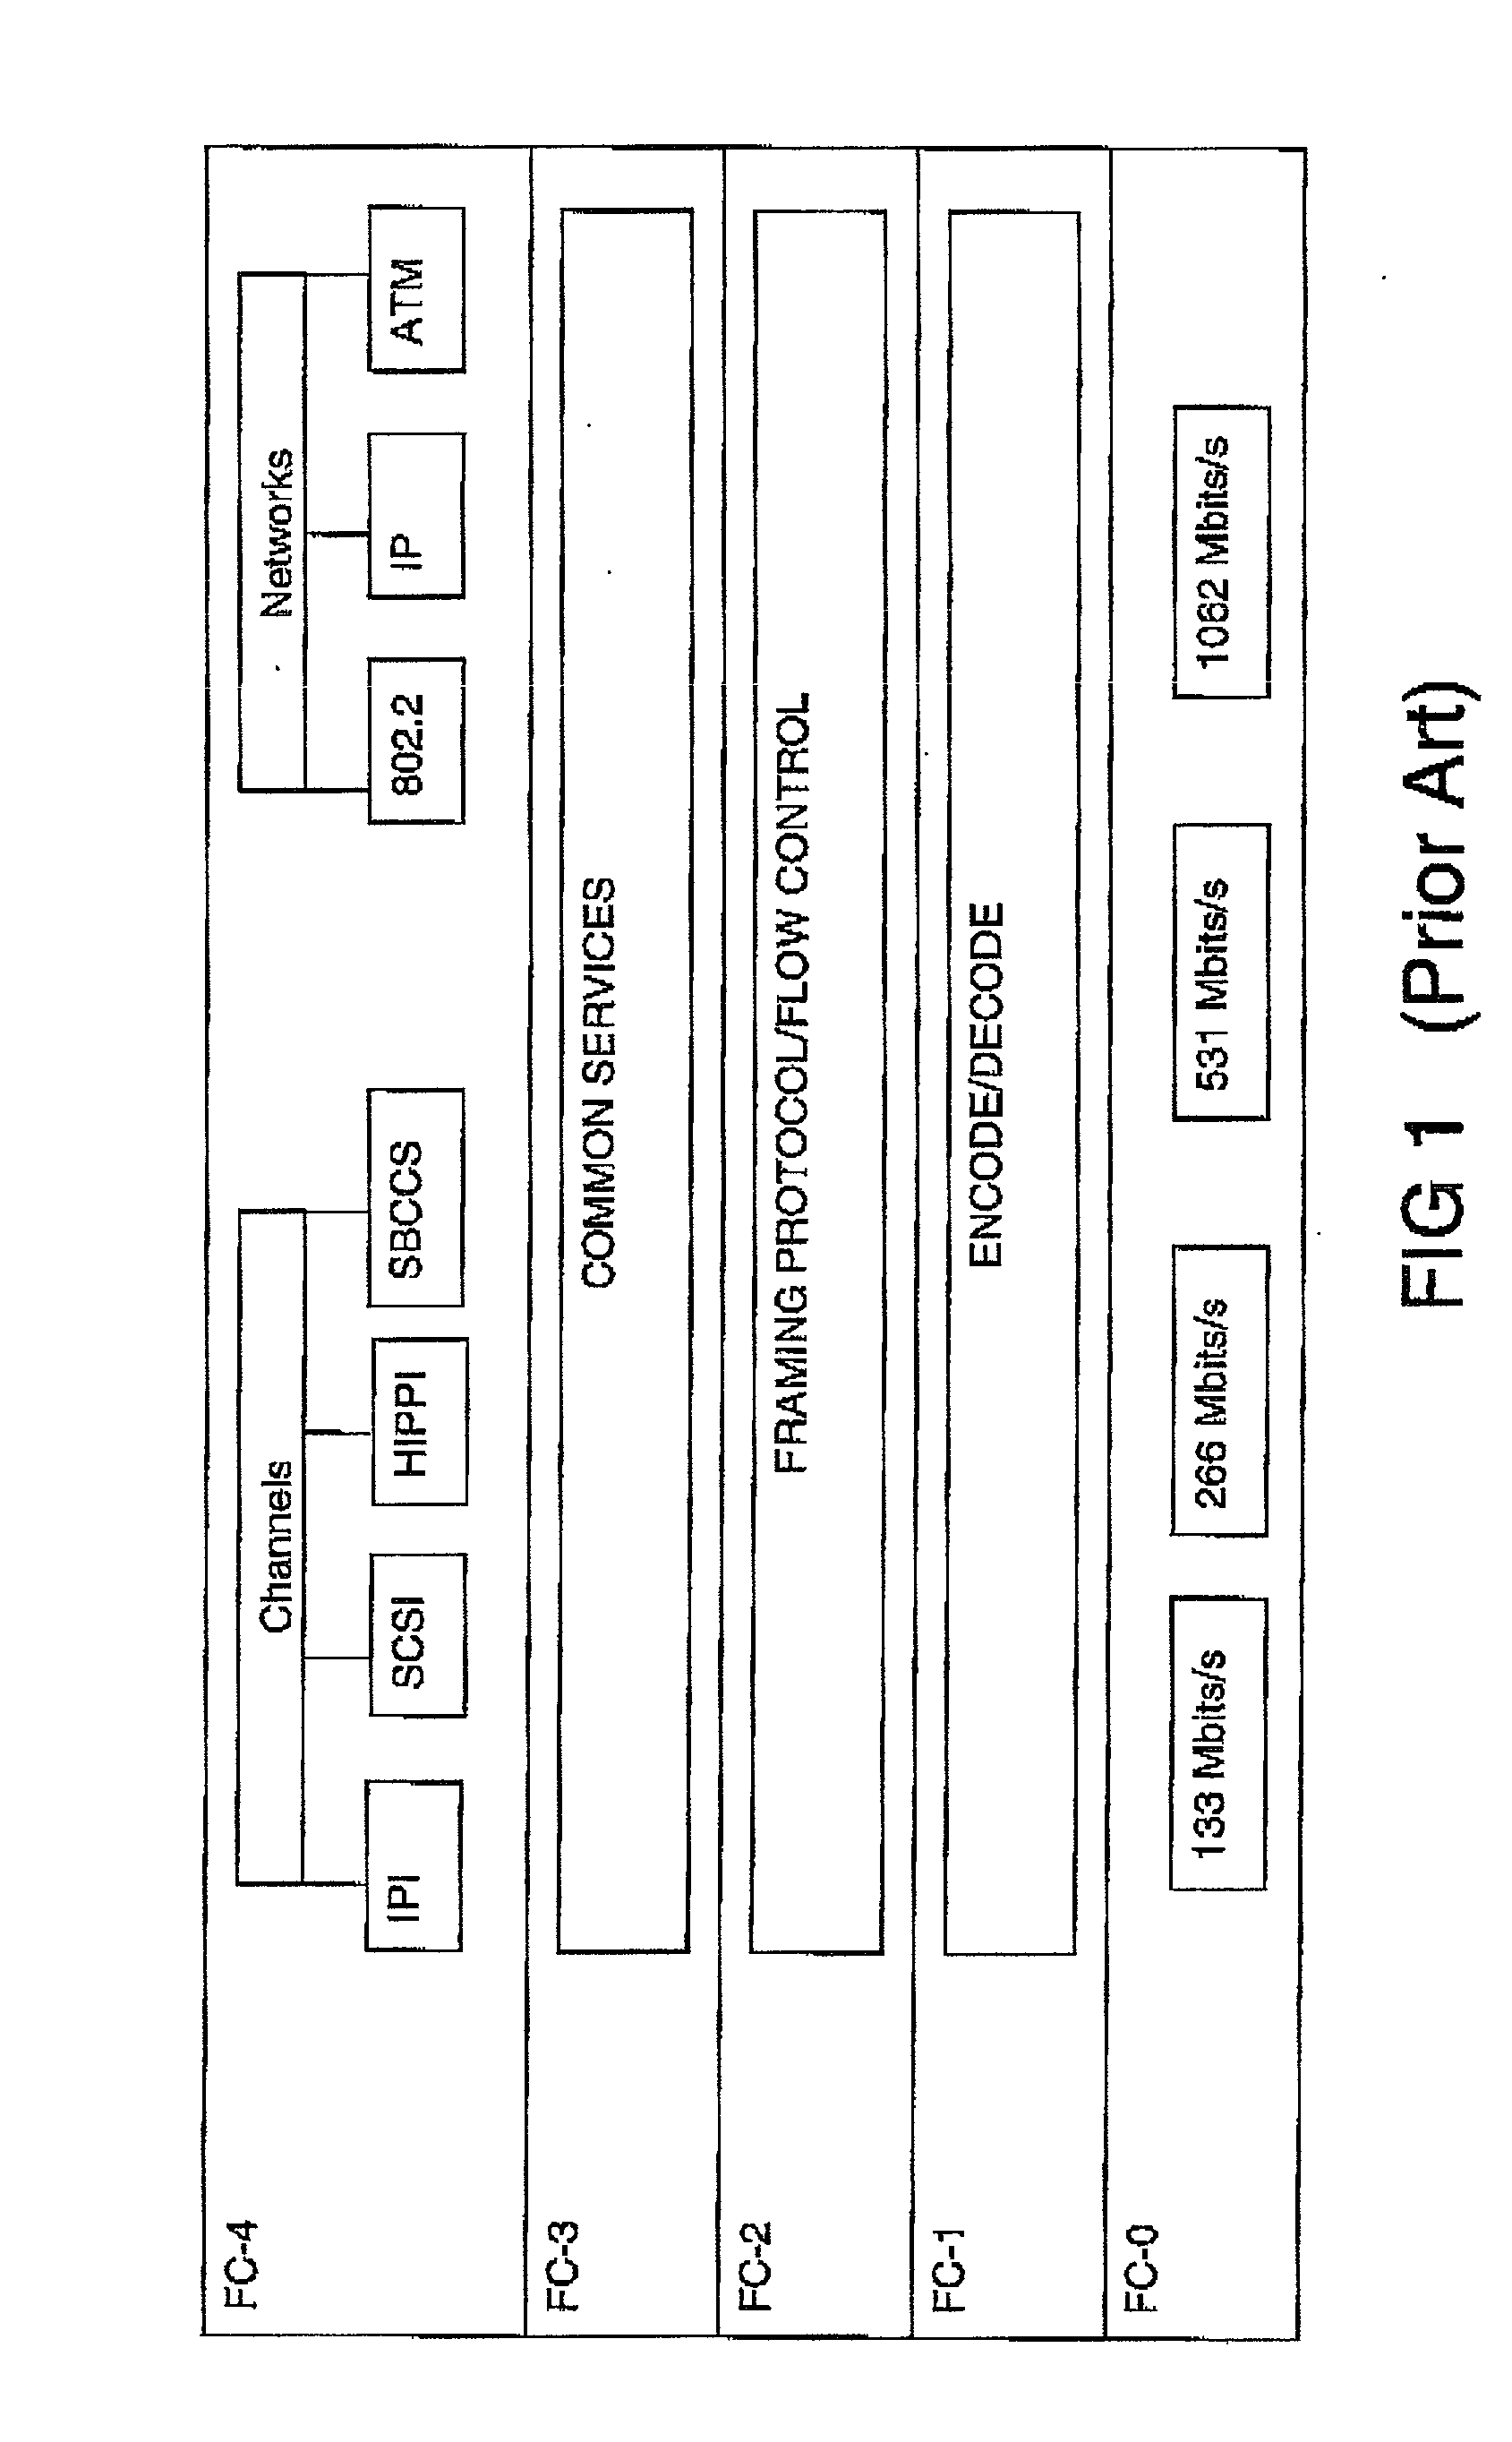 Bandwidth allocation in a synchronous transmission network for packet oriented signals